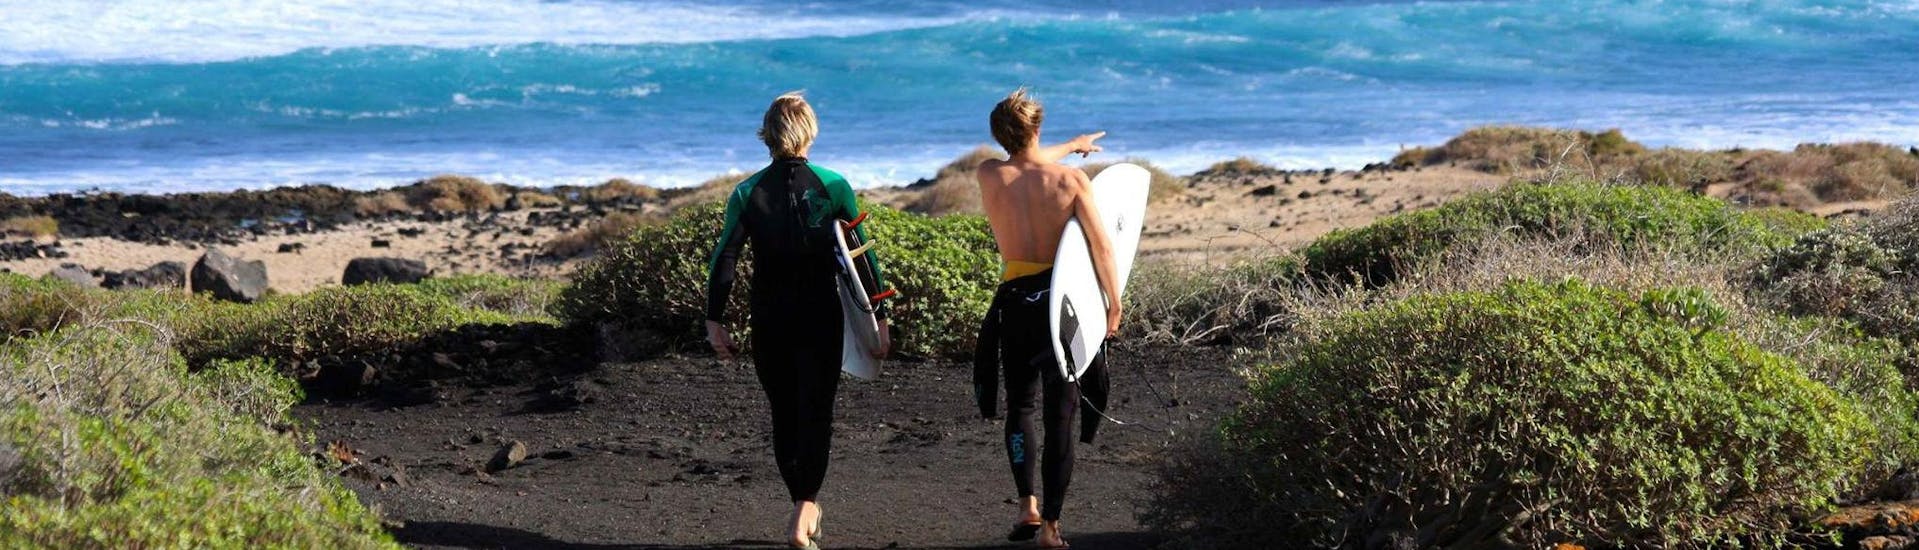 Private Surfing Lessons for Kids & Adults - All Levels.